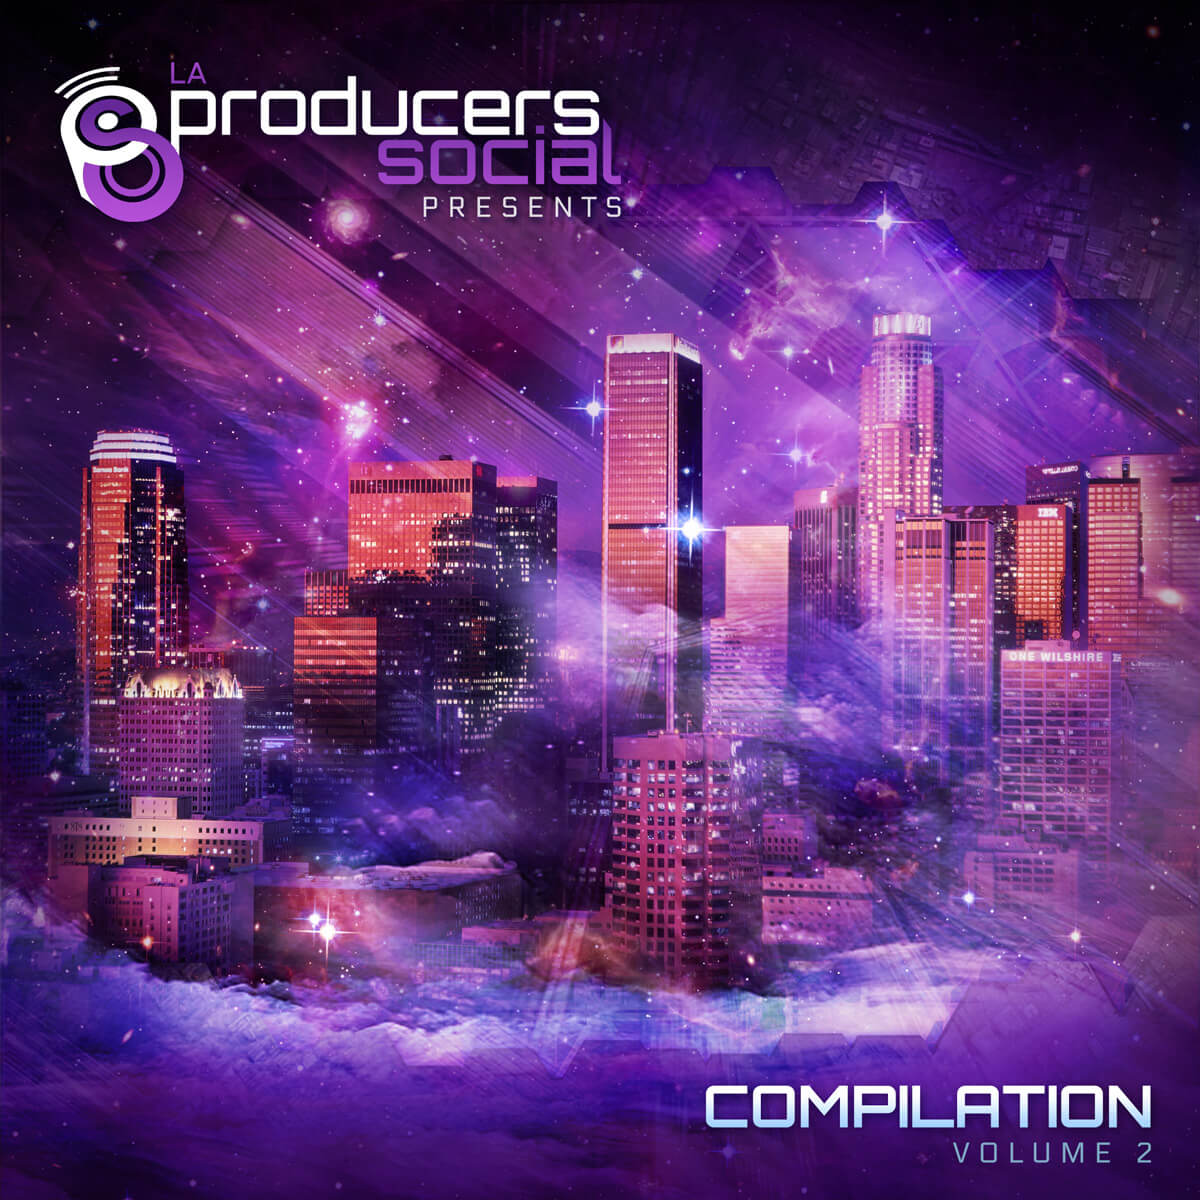 Producers Social Compilation Vol. 2 Music and Cover Art by Axon Genesis